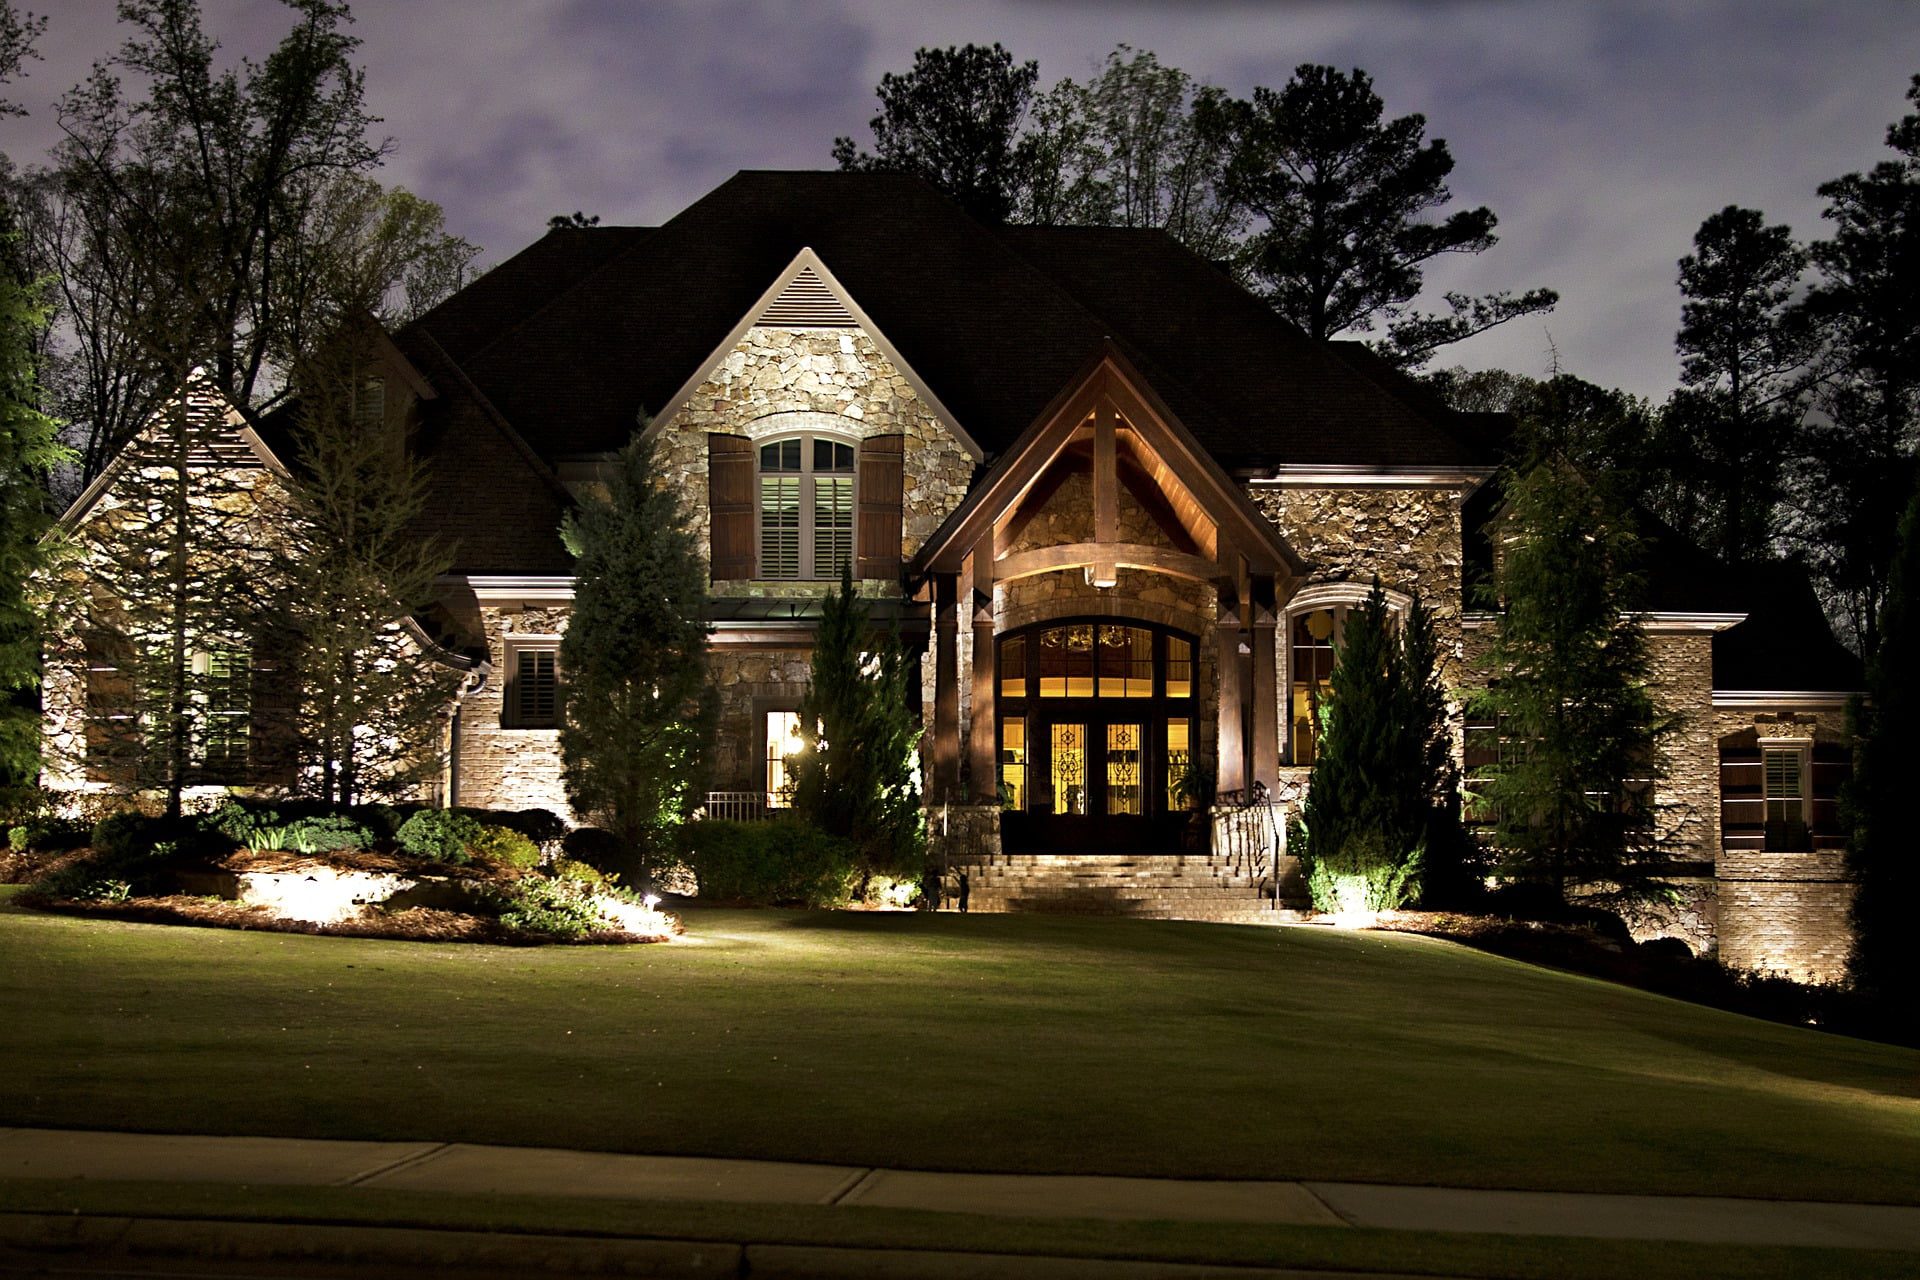 A Landscape Lighting Guide For, Setting Up Outdoor Landscape Lighting Systems